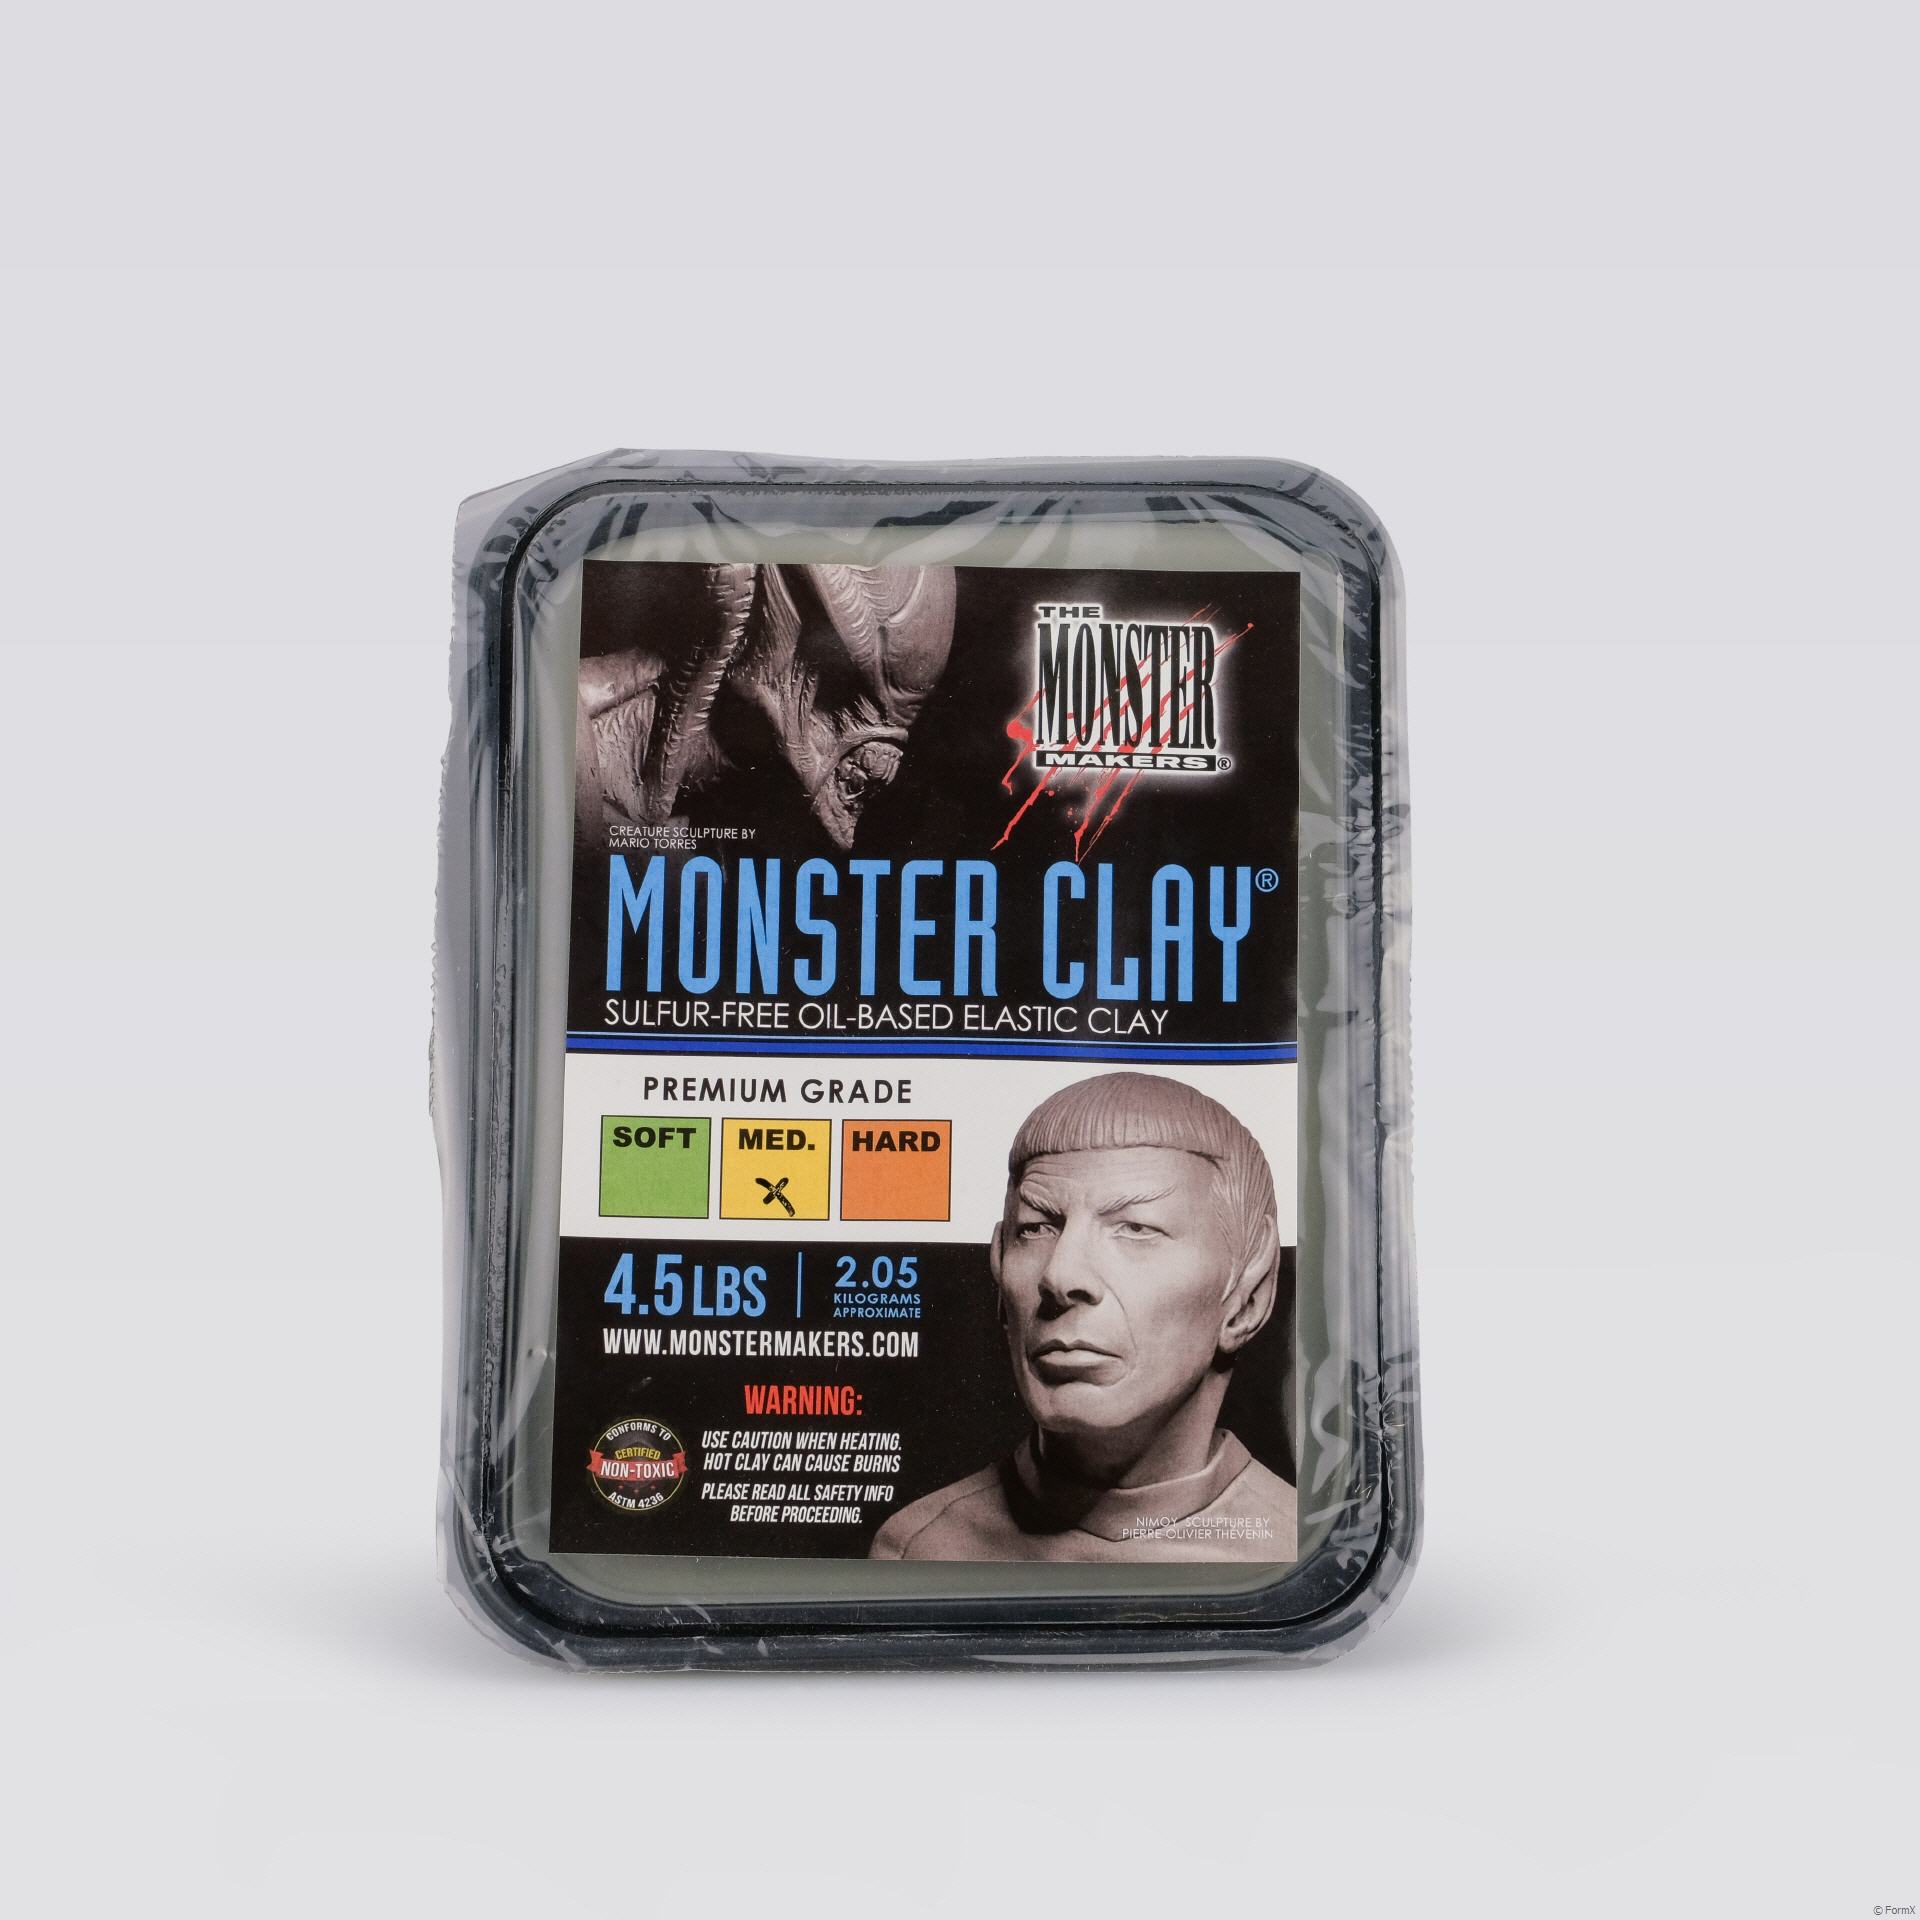 Monster Clay Gray Sulfur Free Elastic Clay